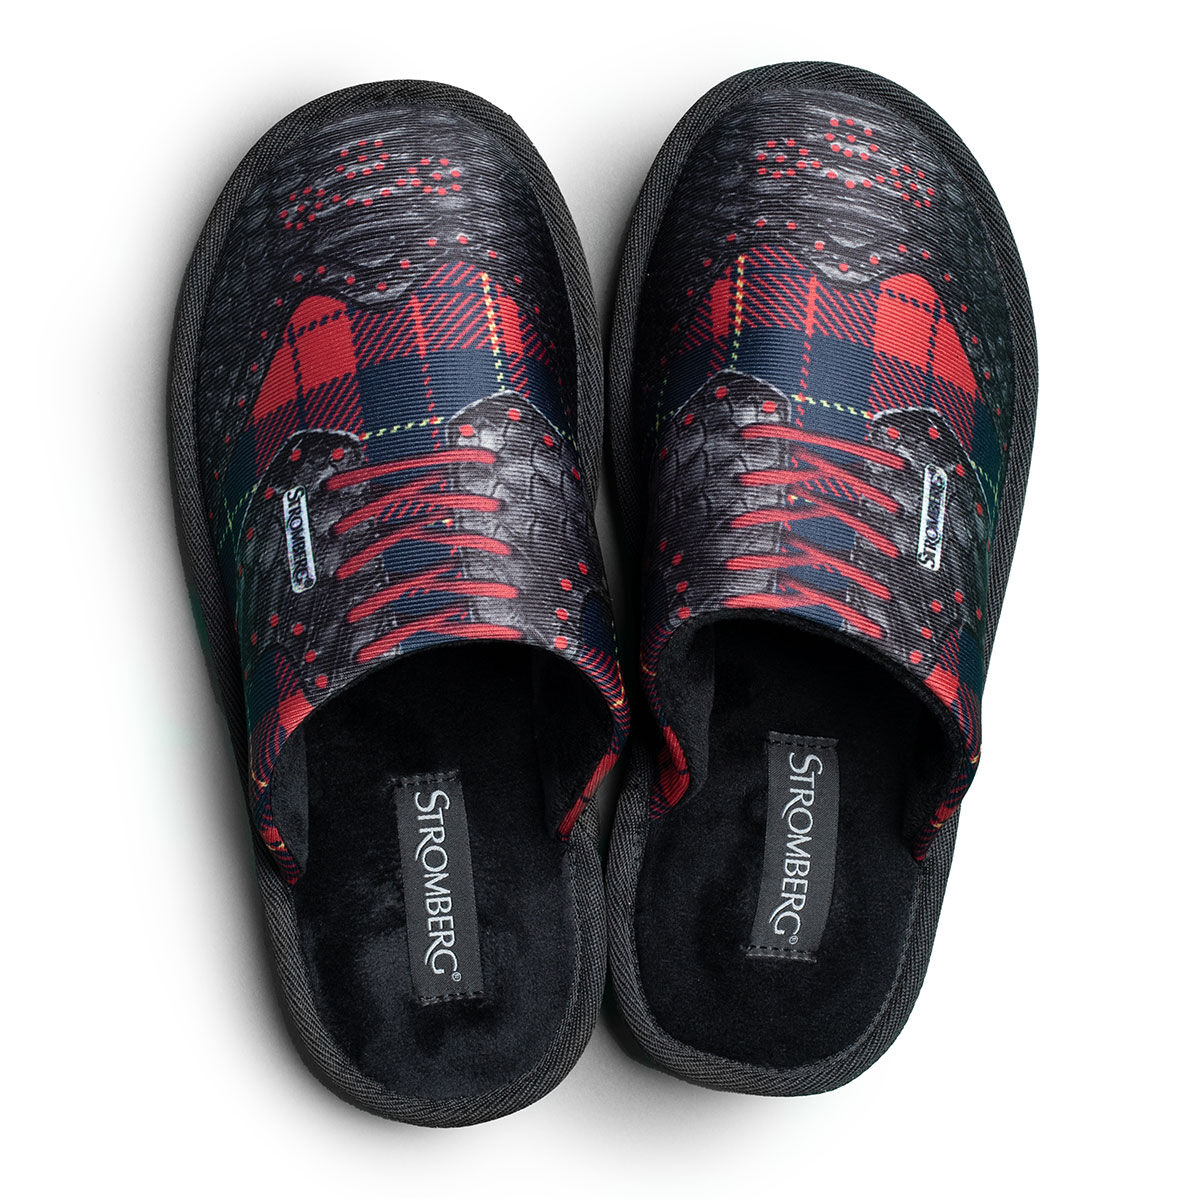 Stromberg Black, Grey and Red Comfortable Tartan Mule Golf Slippers, Size: 6 | American Golf